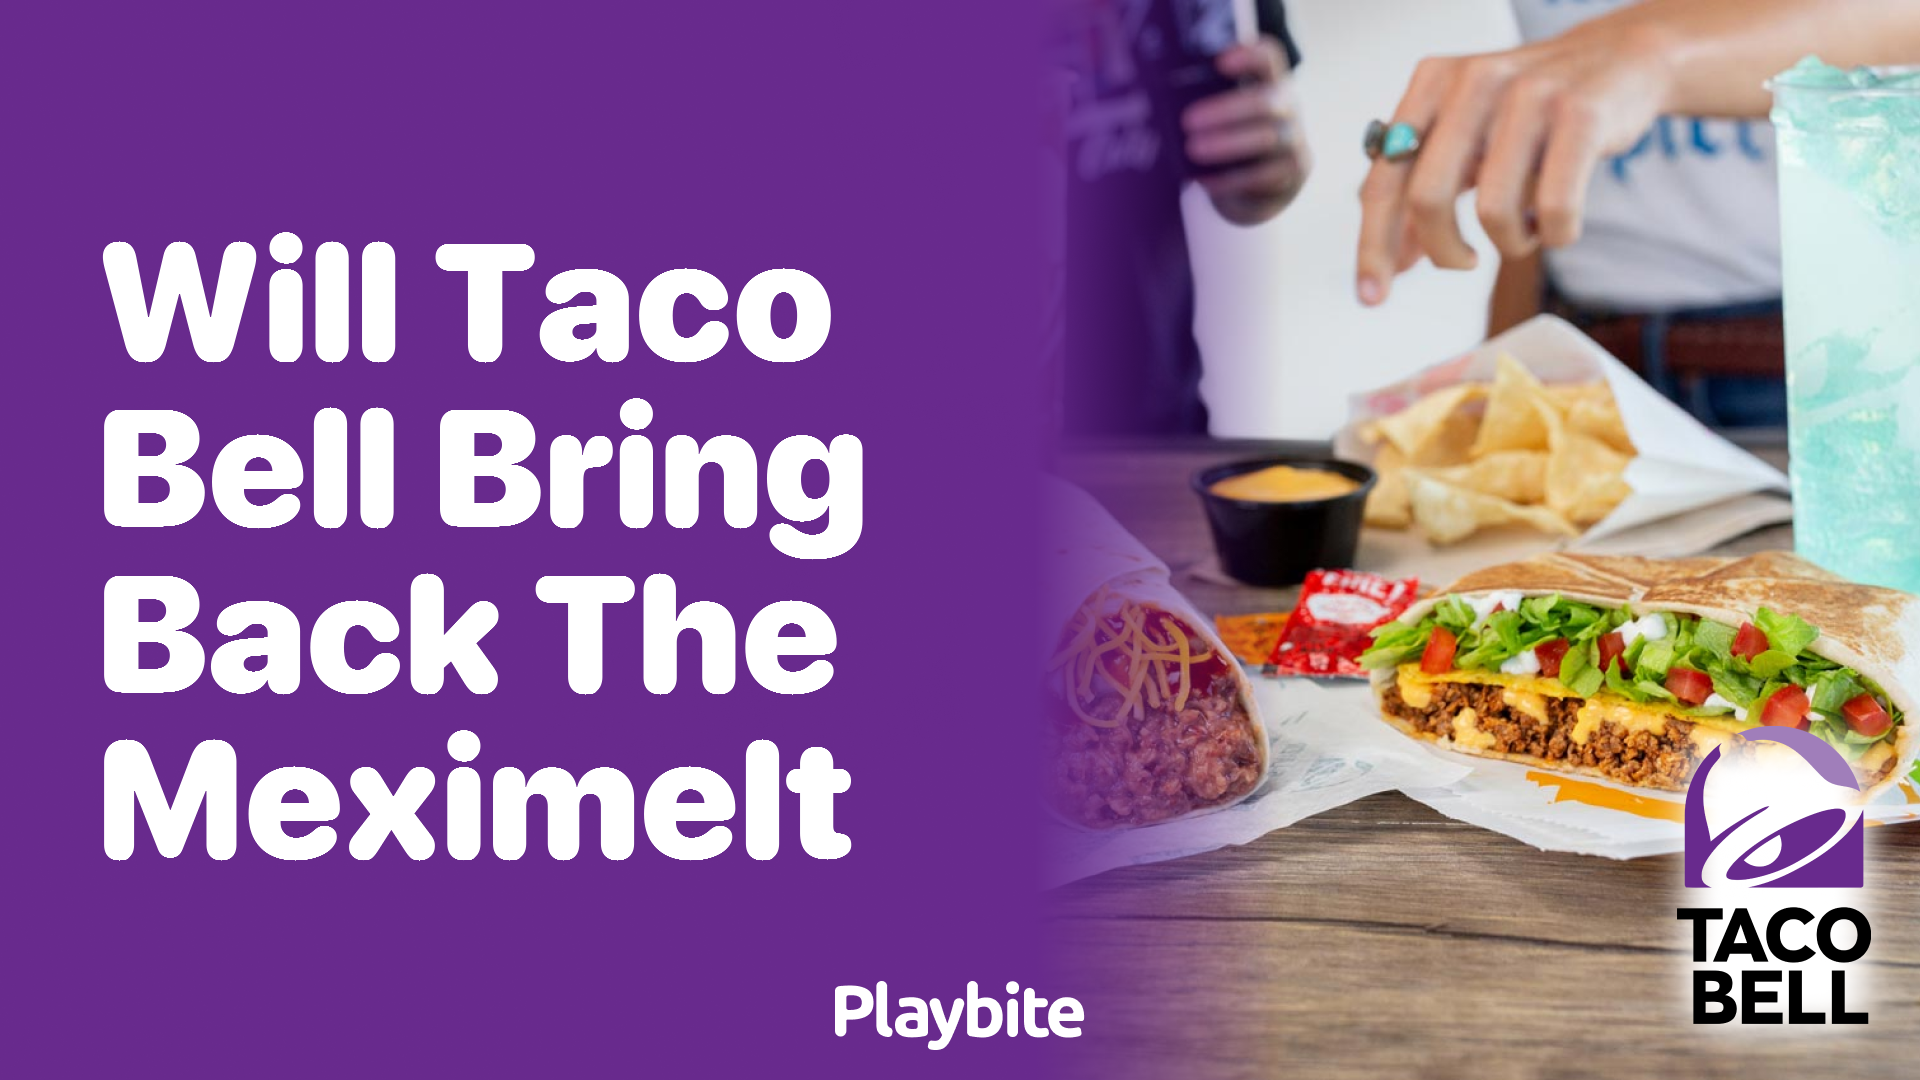 Will Taco Bell Bring Back the MexiMelt?